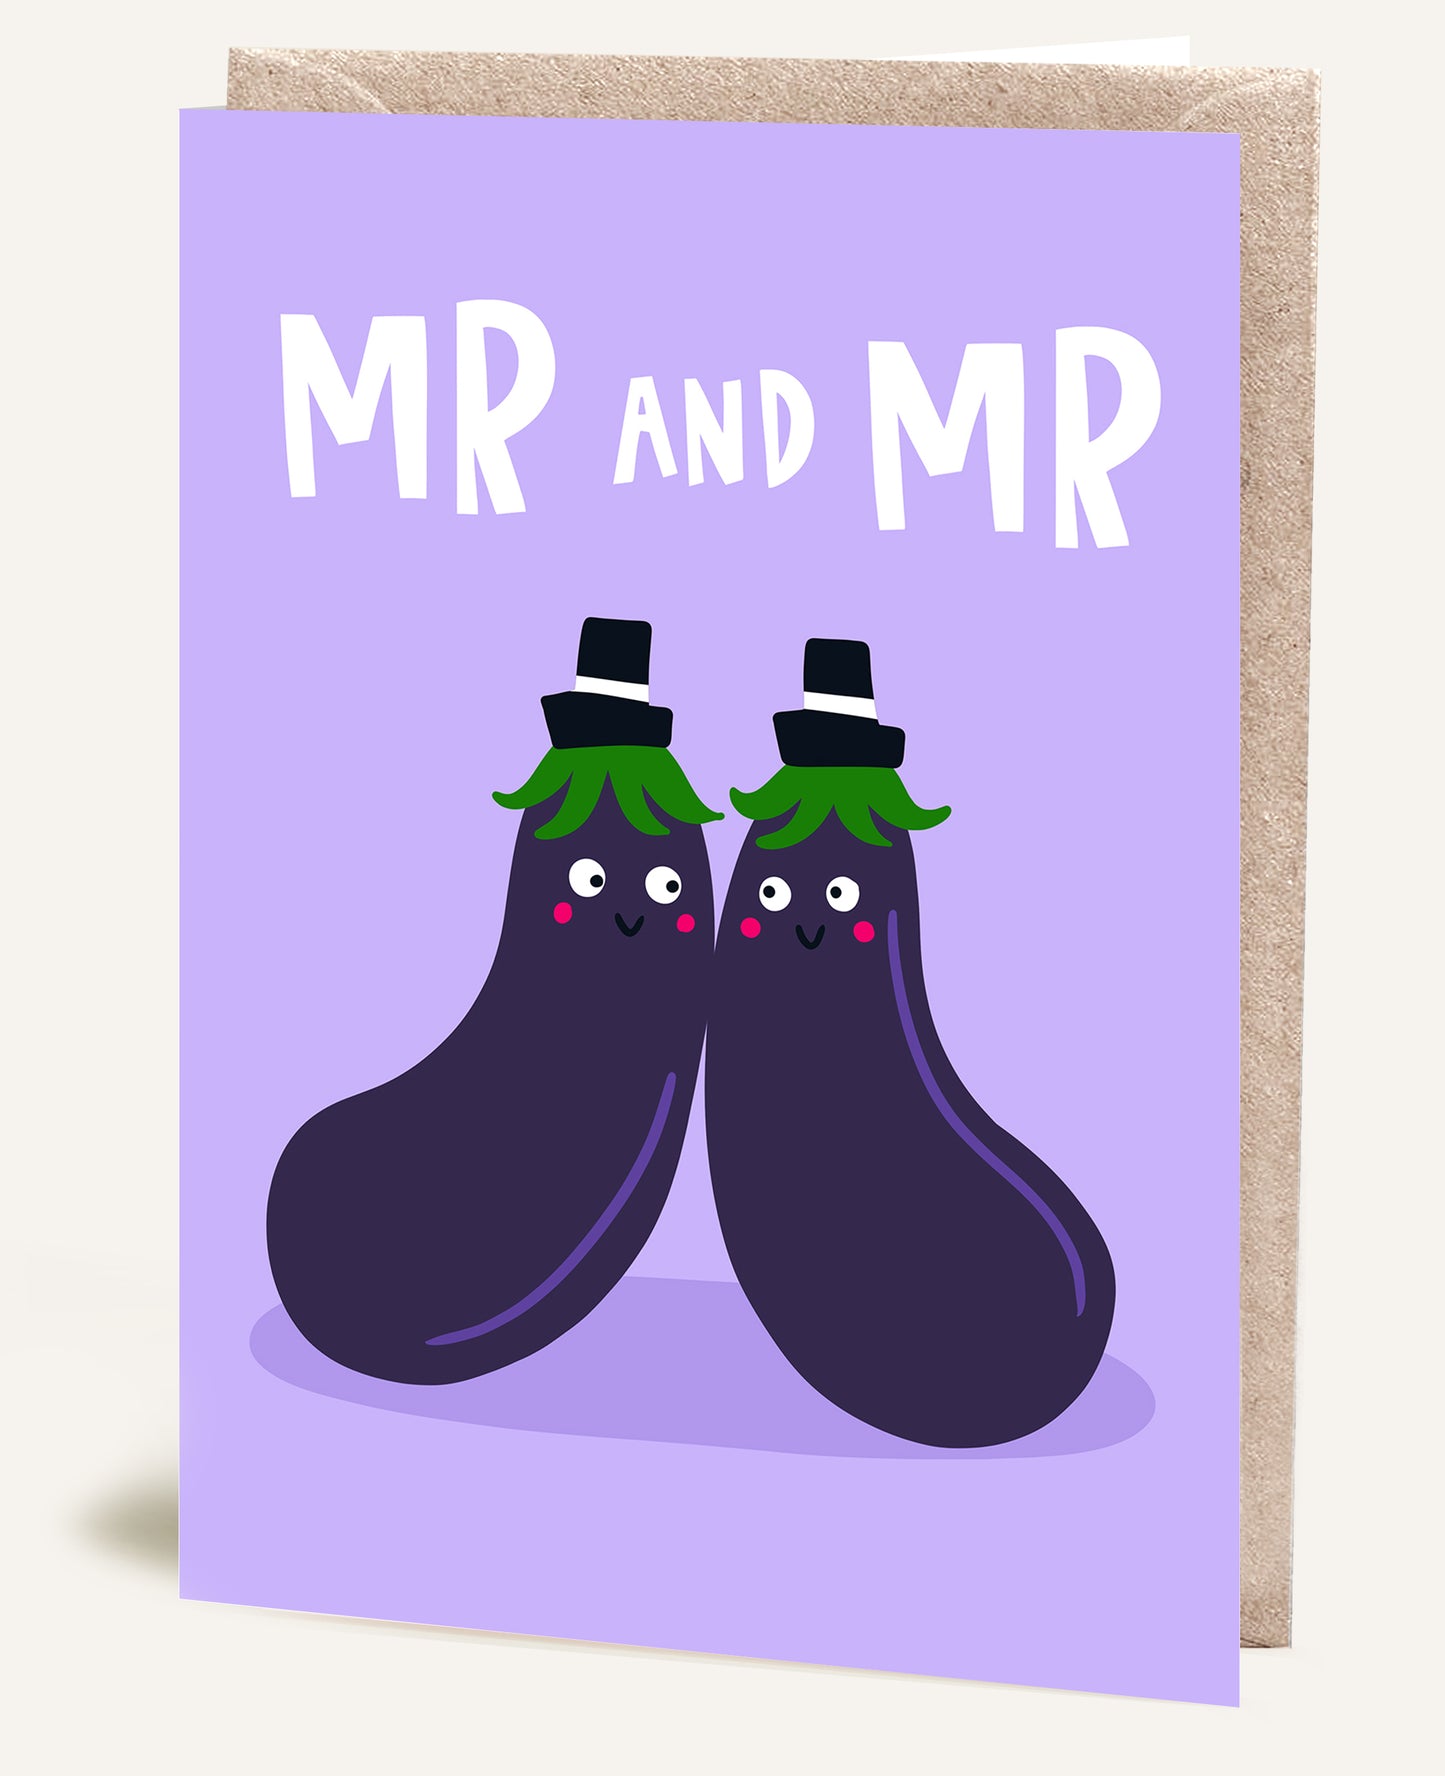 MR AND MR